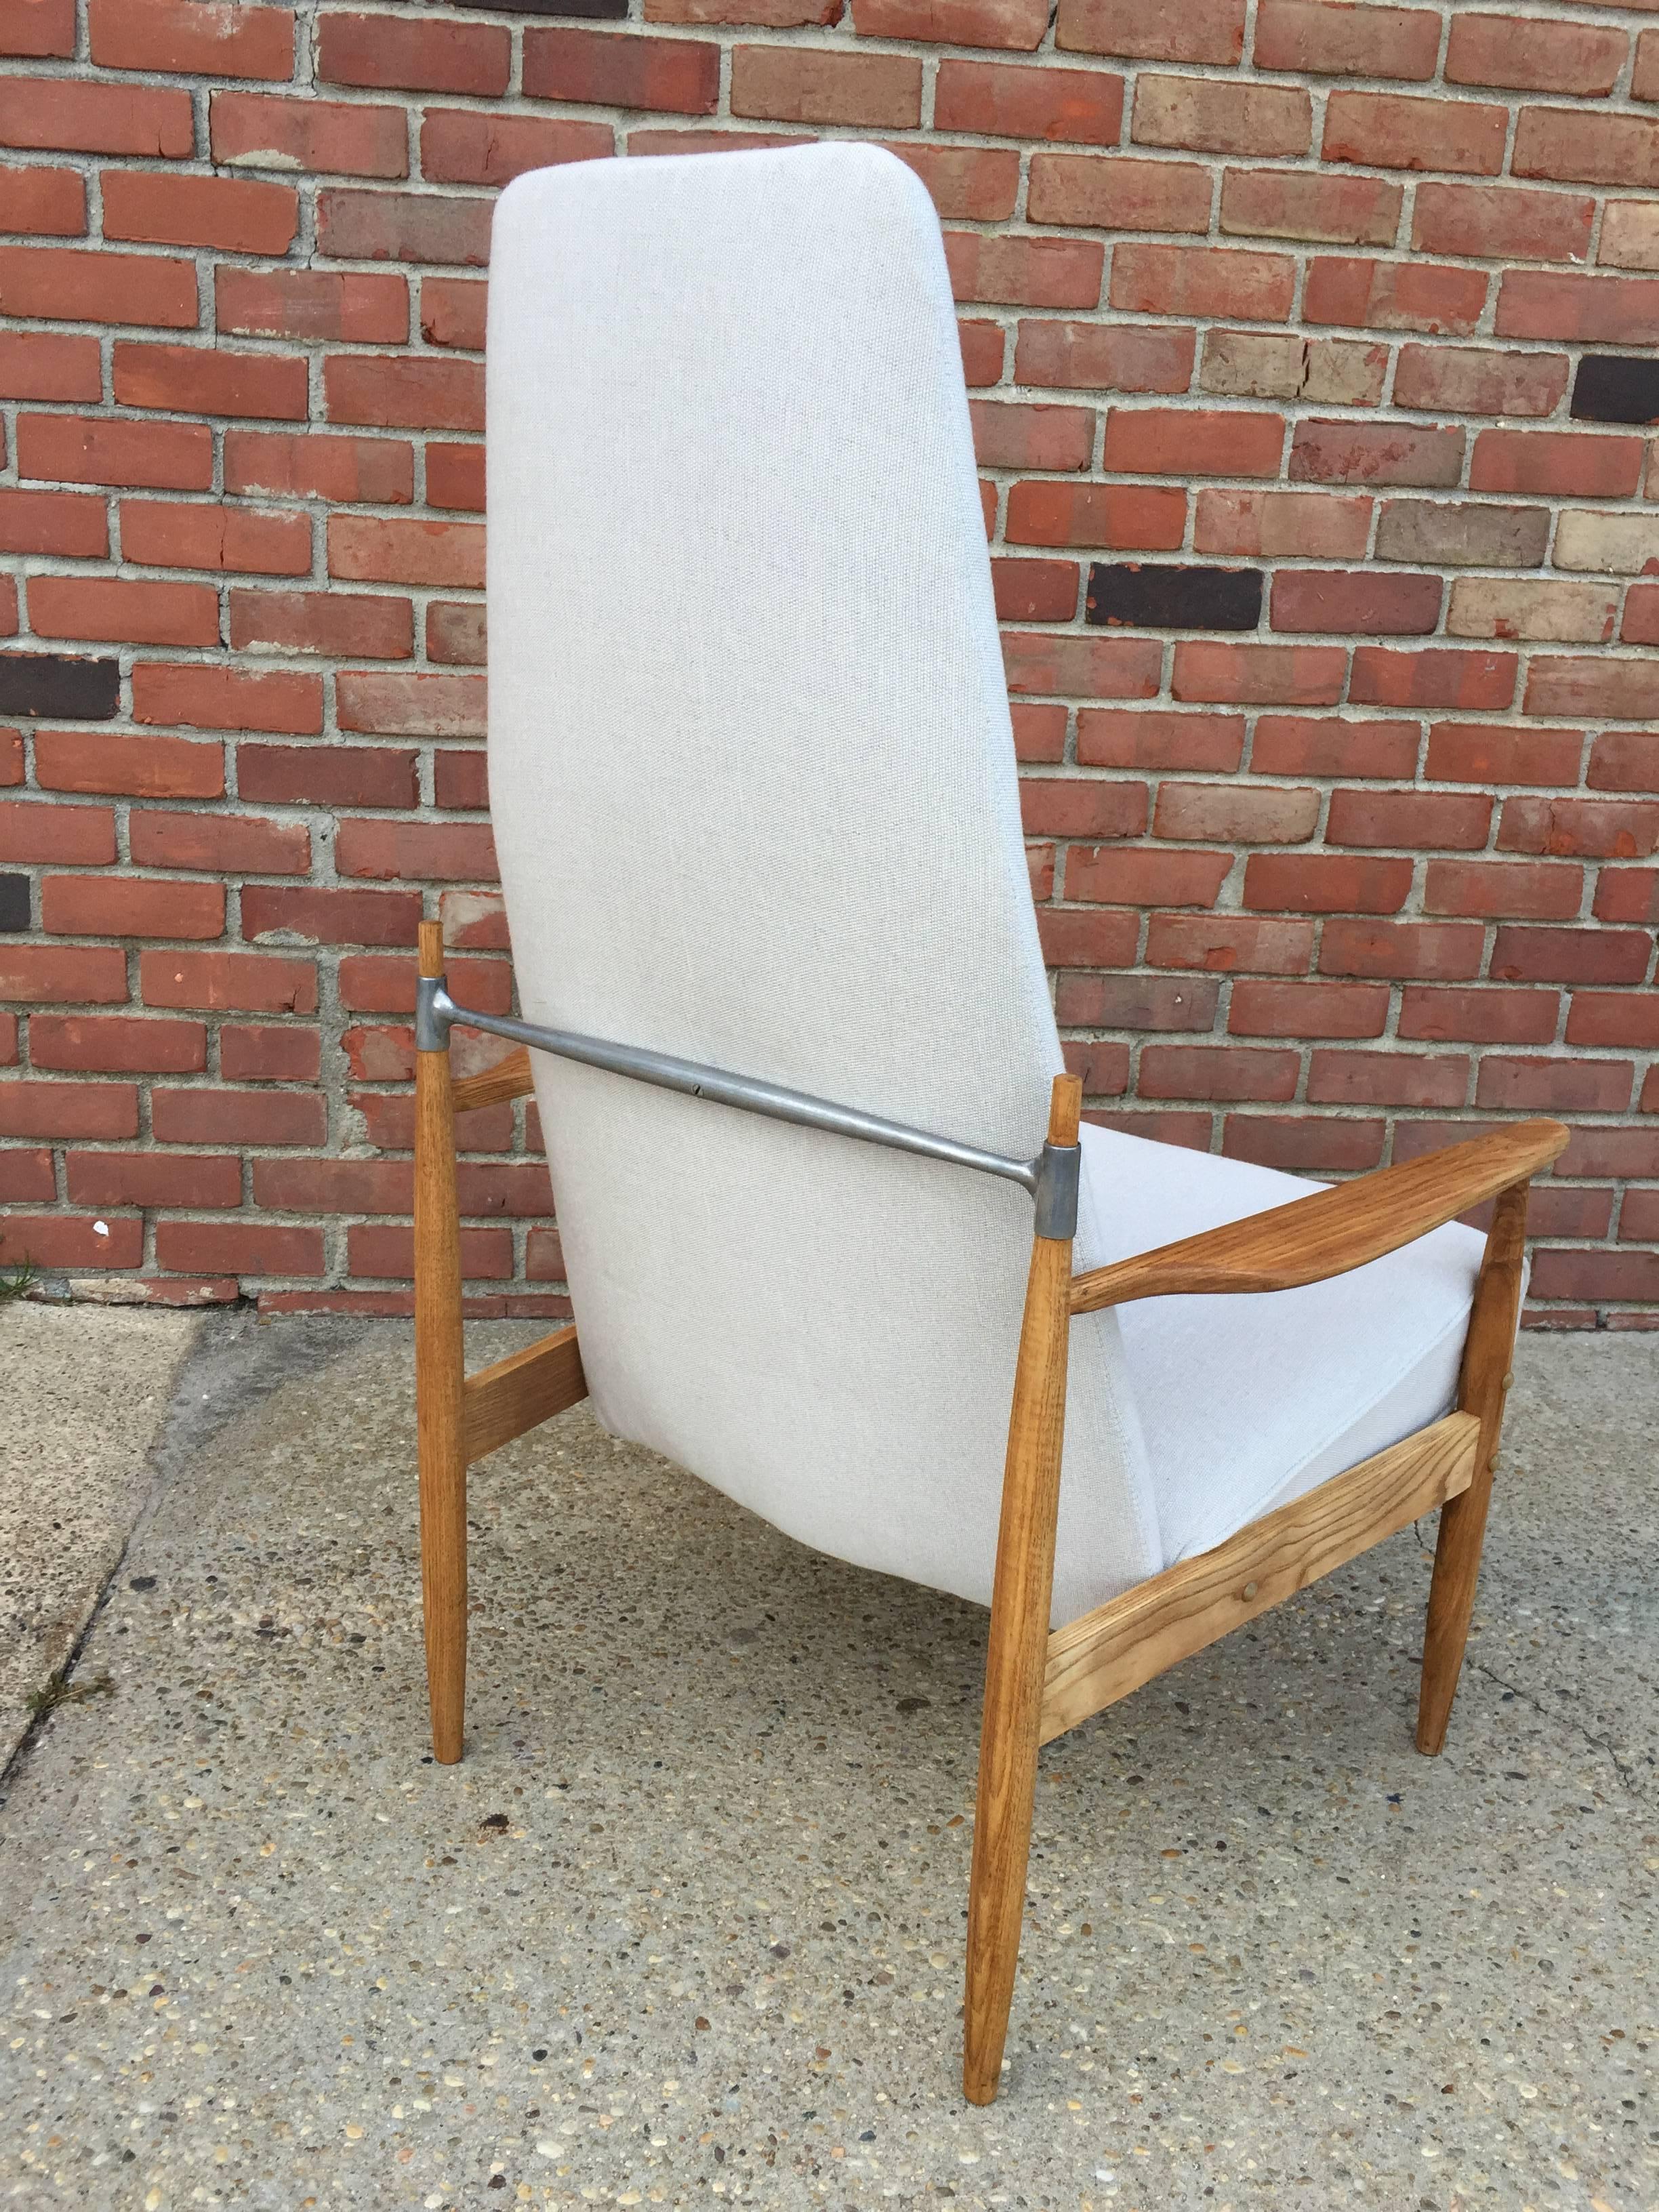 Excellent high back chair in great condition in teak with aluminum accents by Danish Mid-Century designer Peter Hvidt.